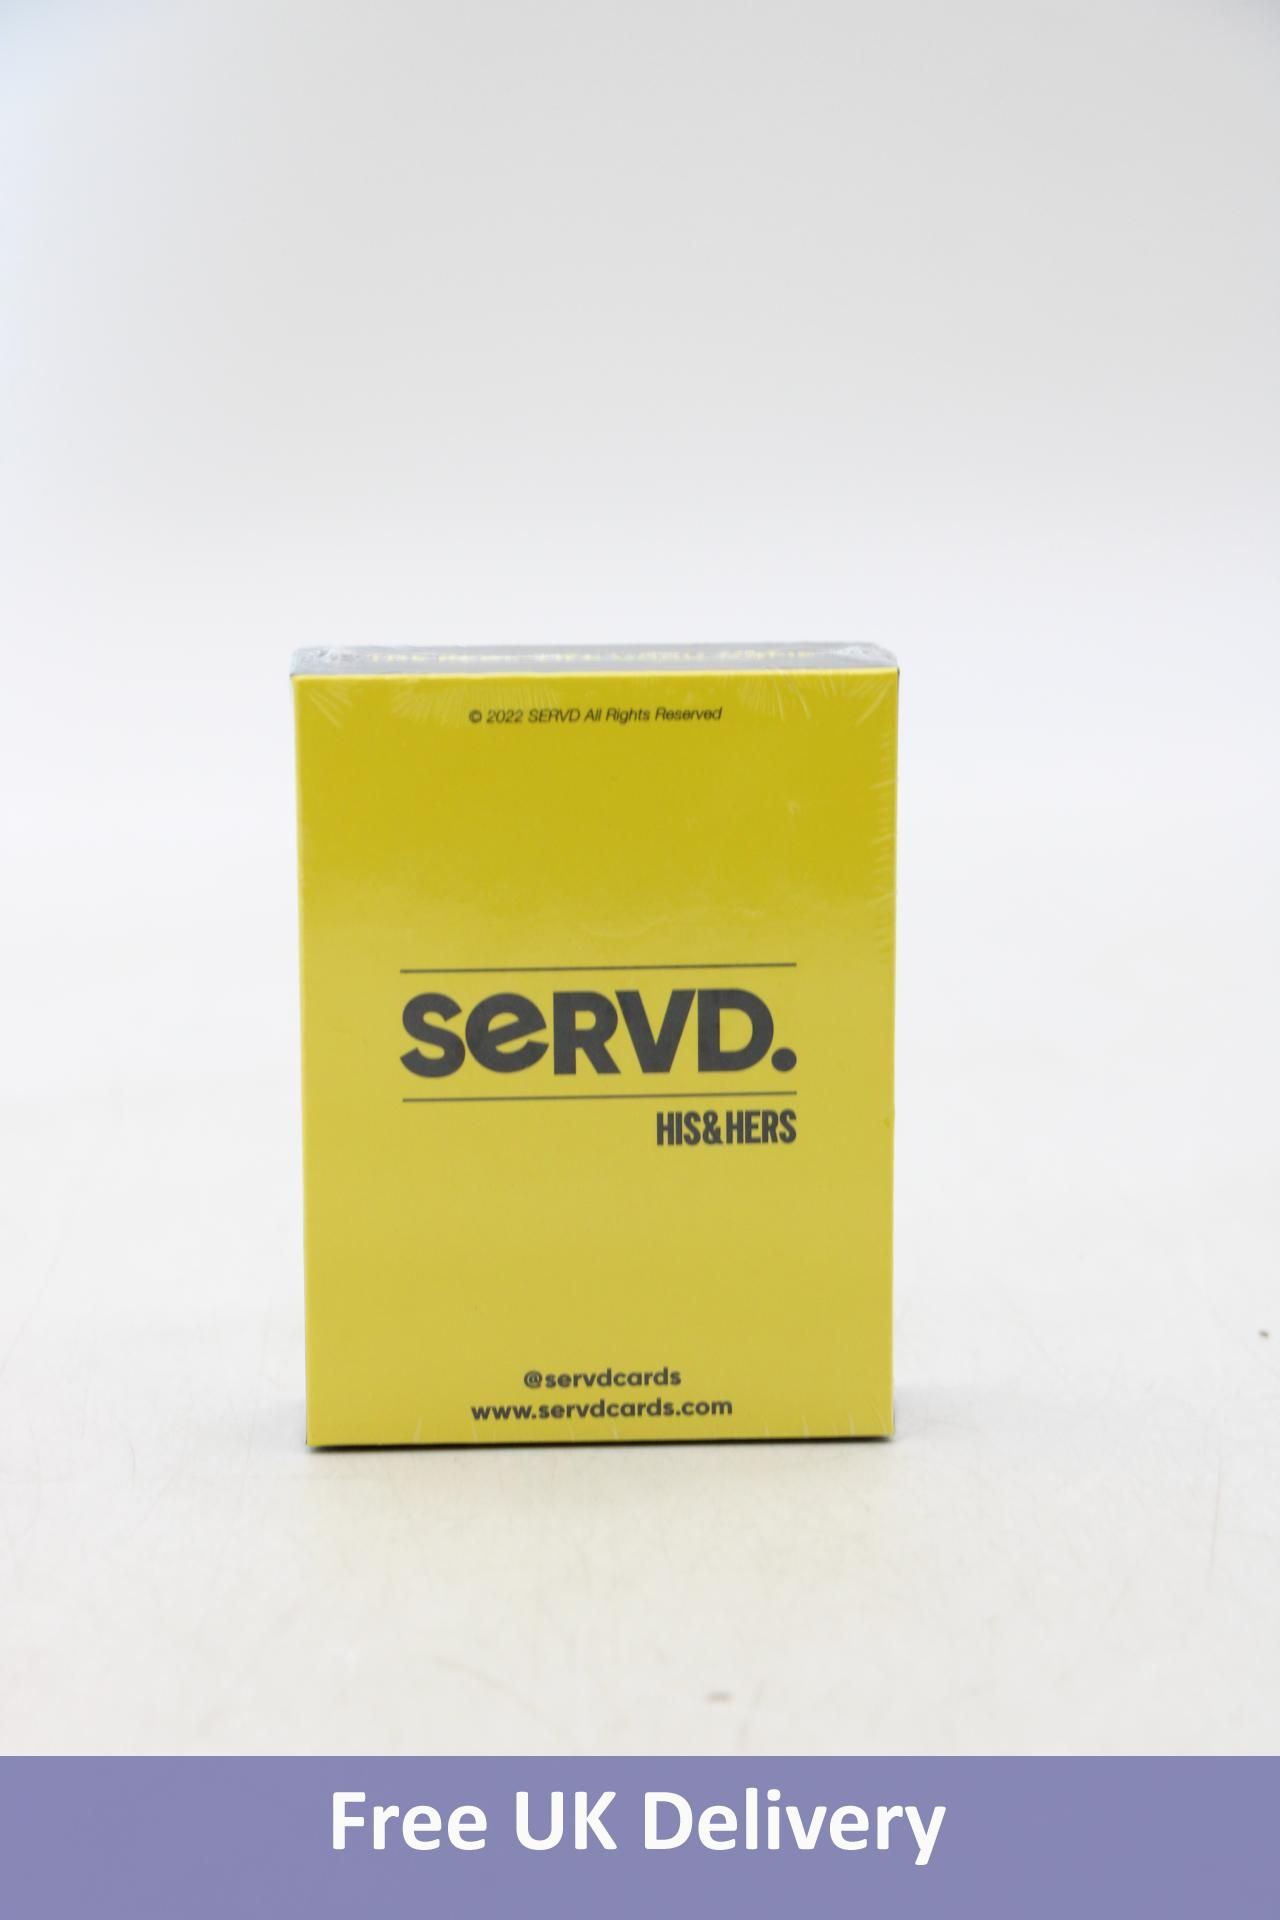 Twenty-four packs of Servd His & Her, The Hilarious Real-Life Couples Card Game - Image 2 of 8